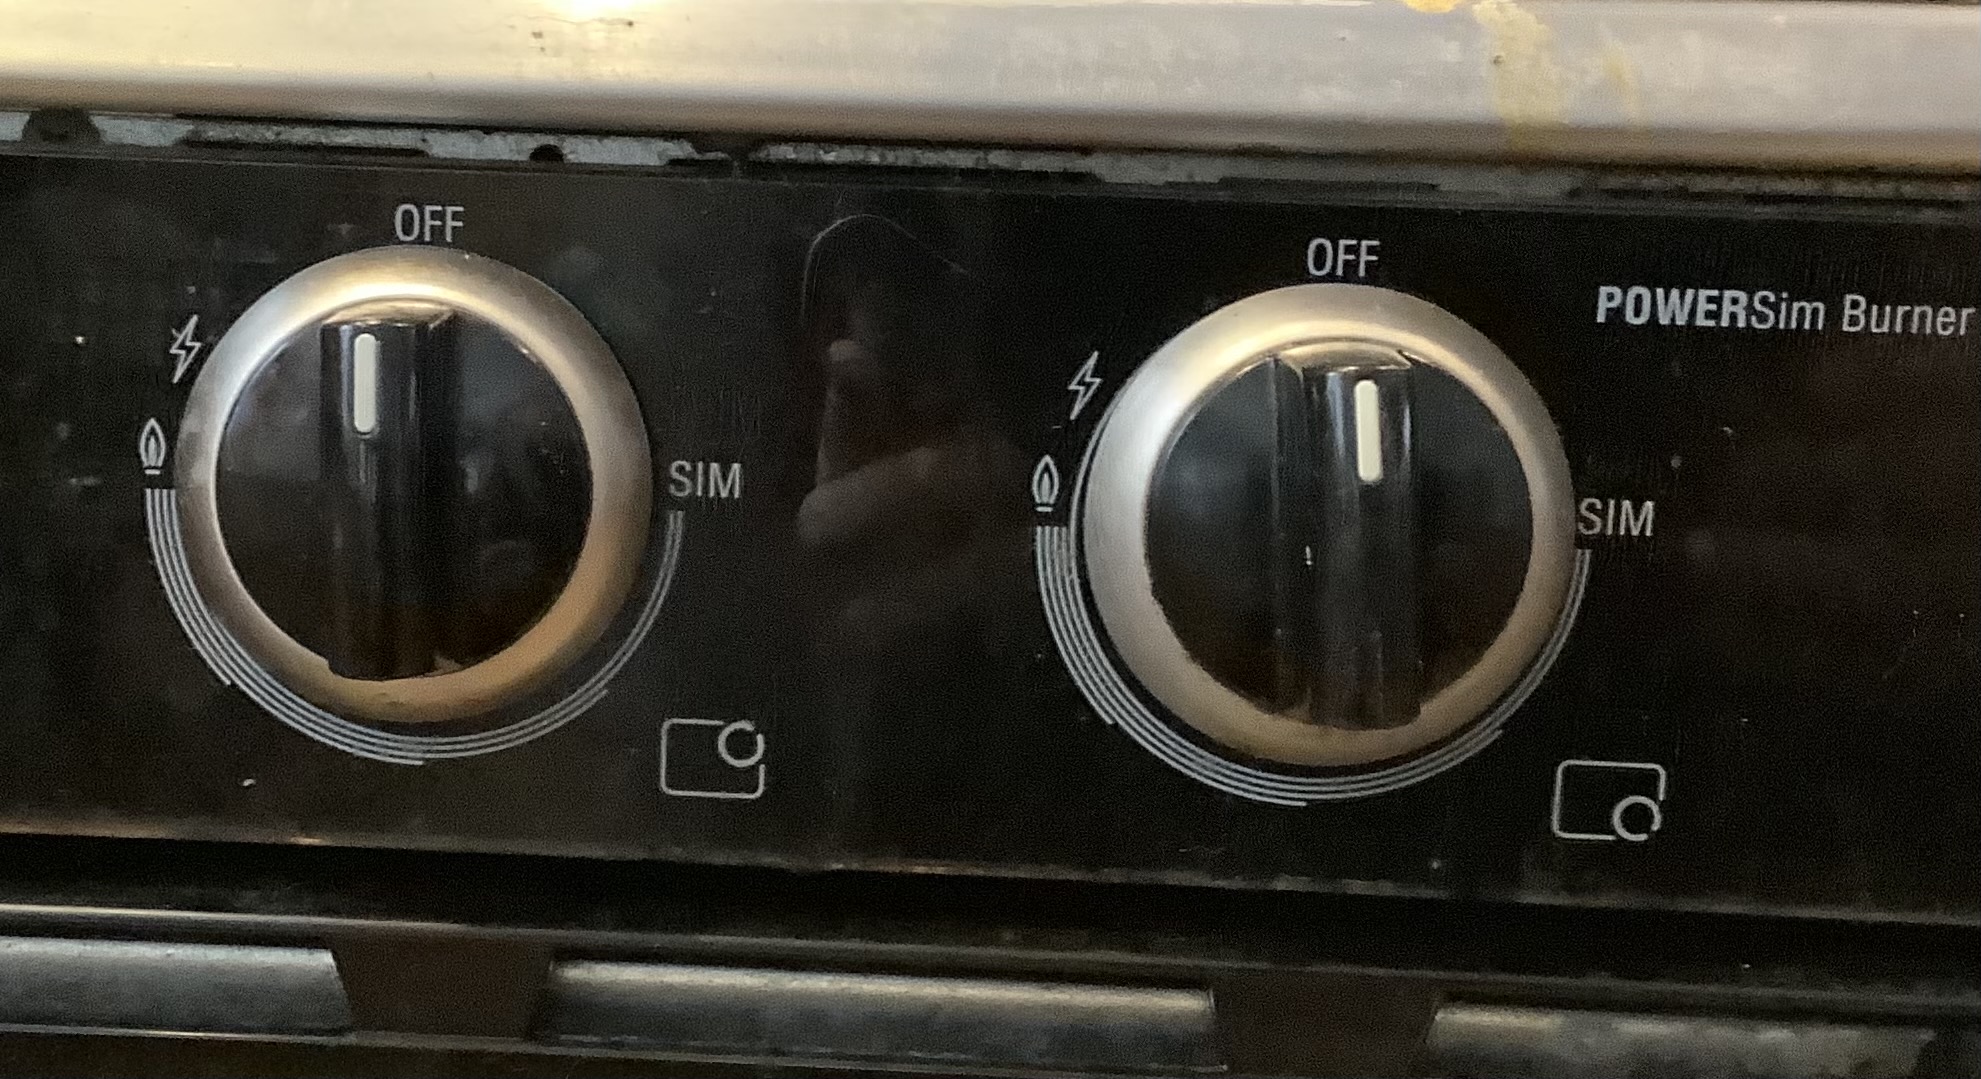 My stove is trying to kill me